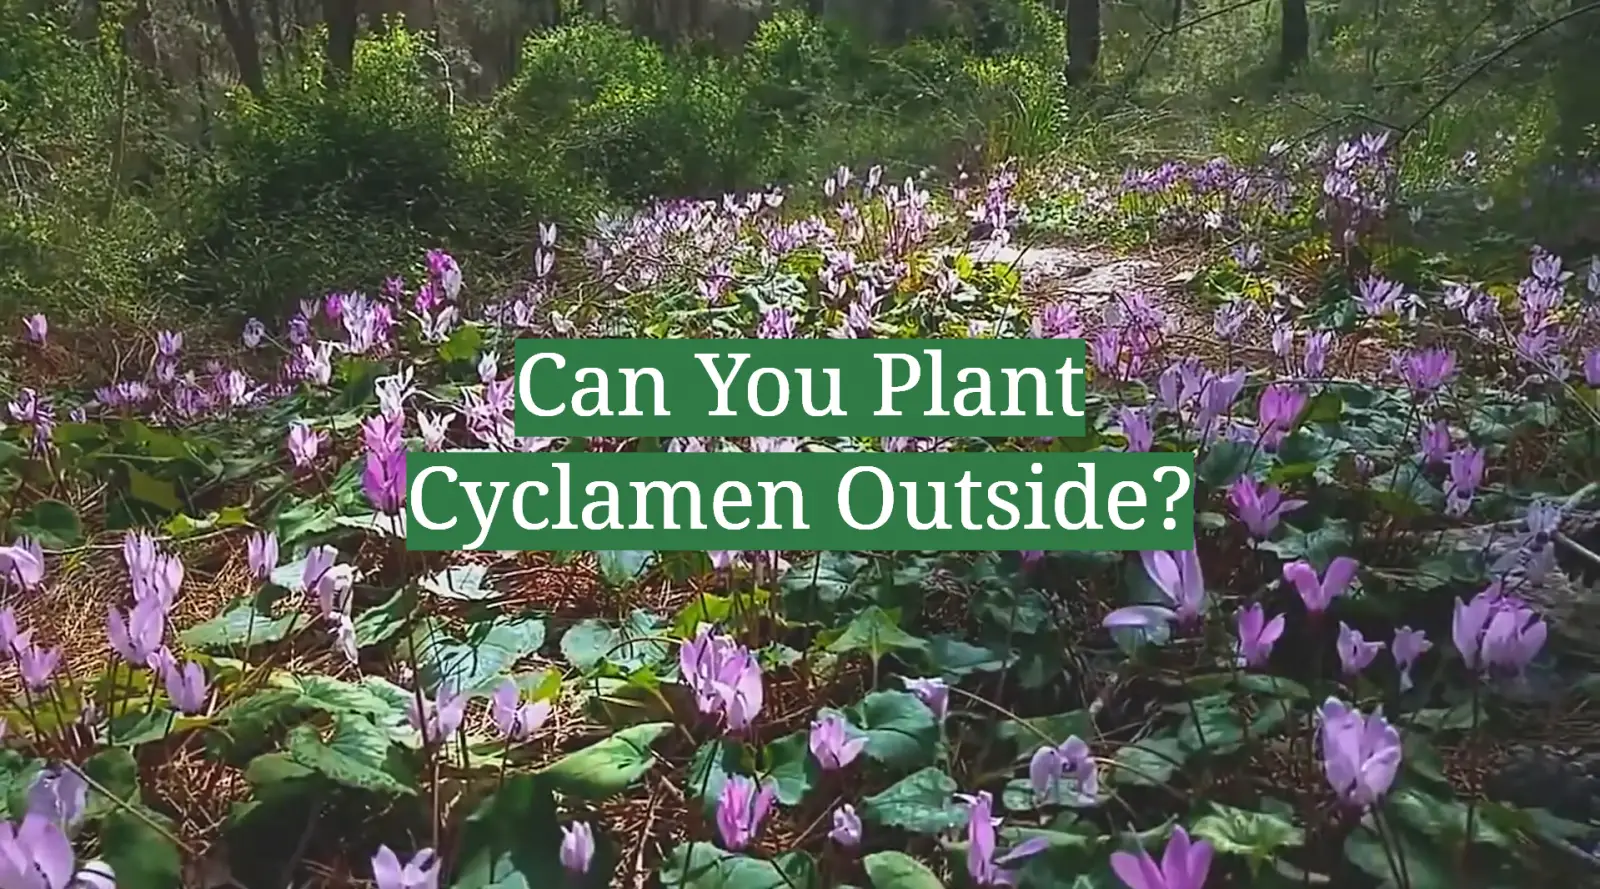 Can You Plant Cyclamen Outside?